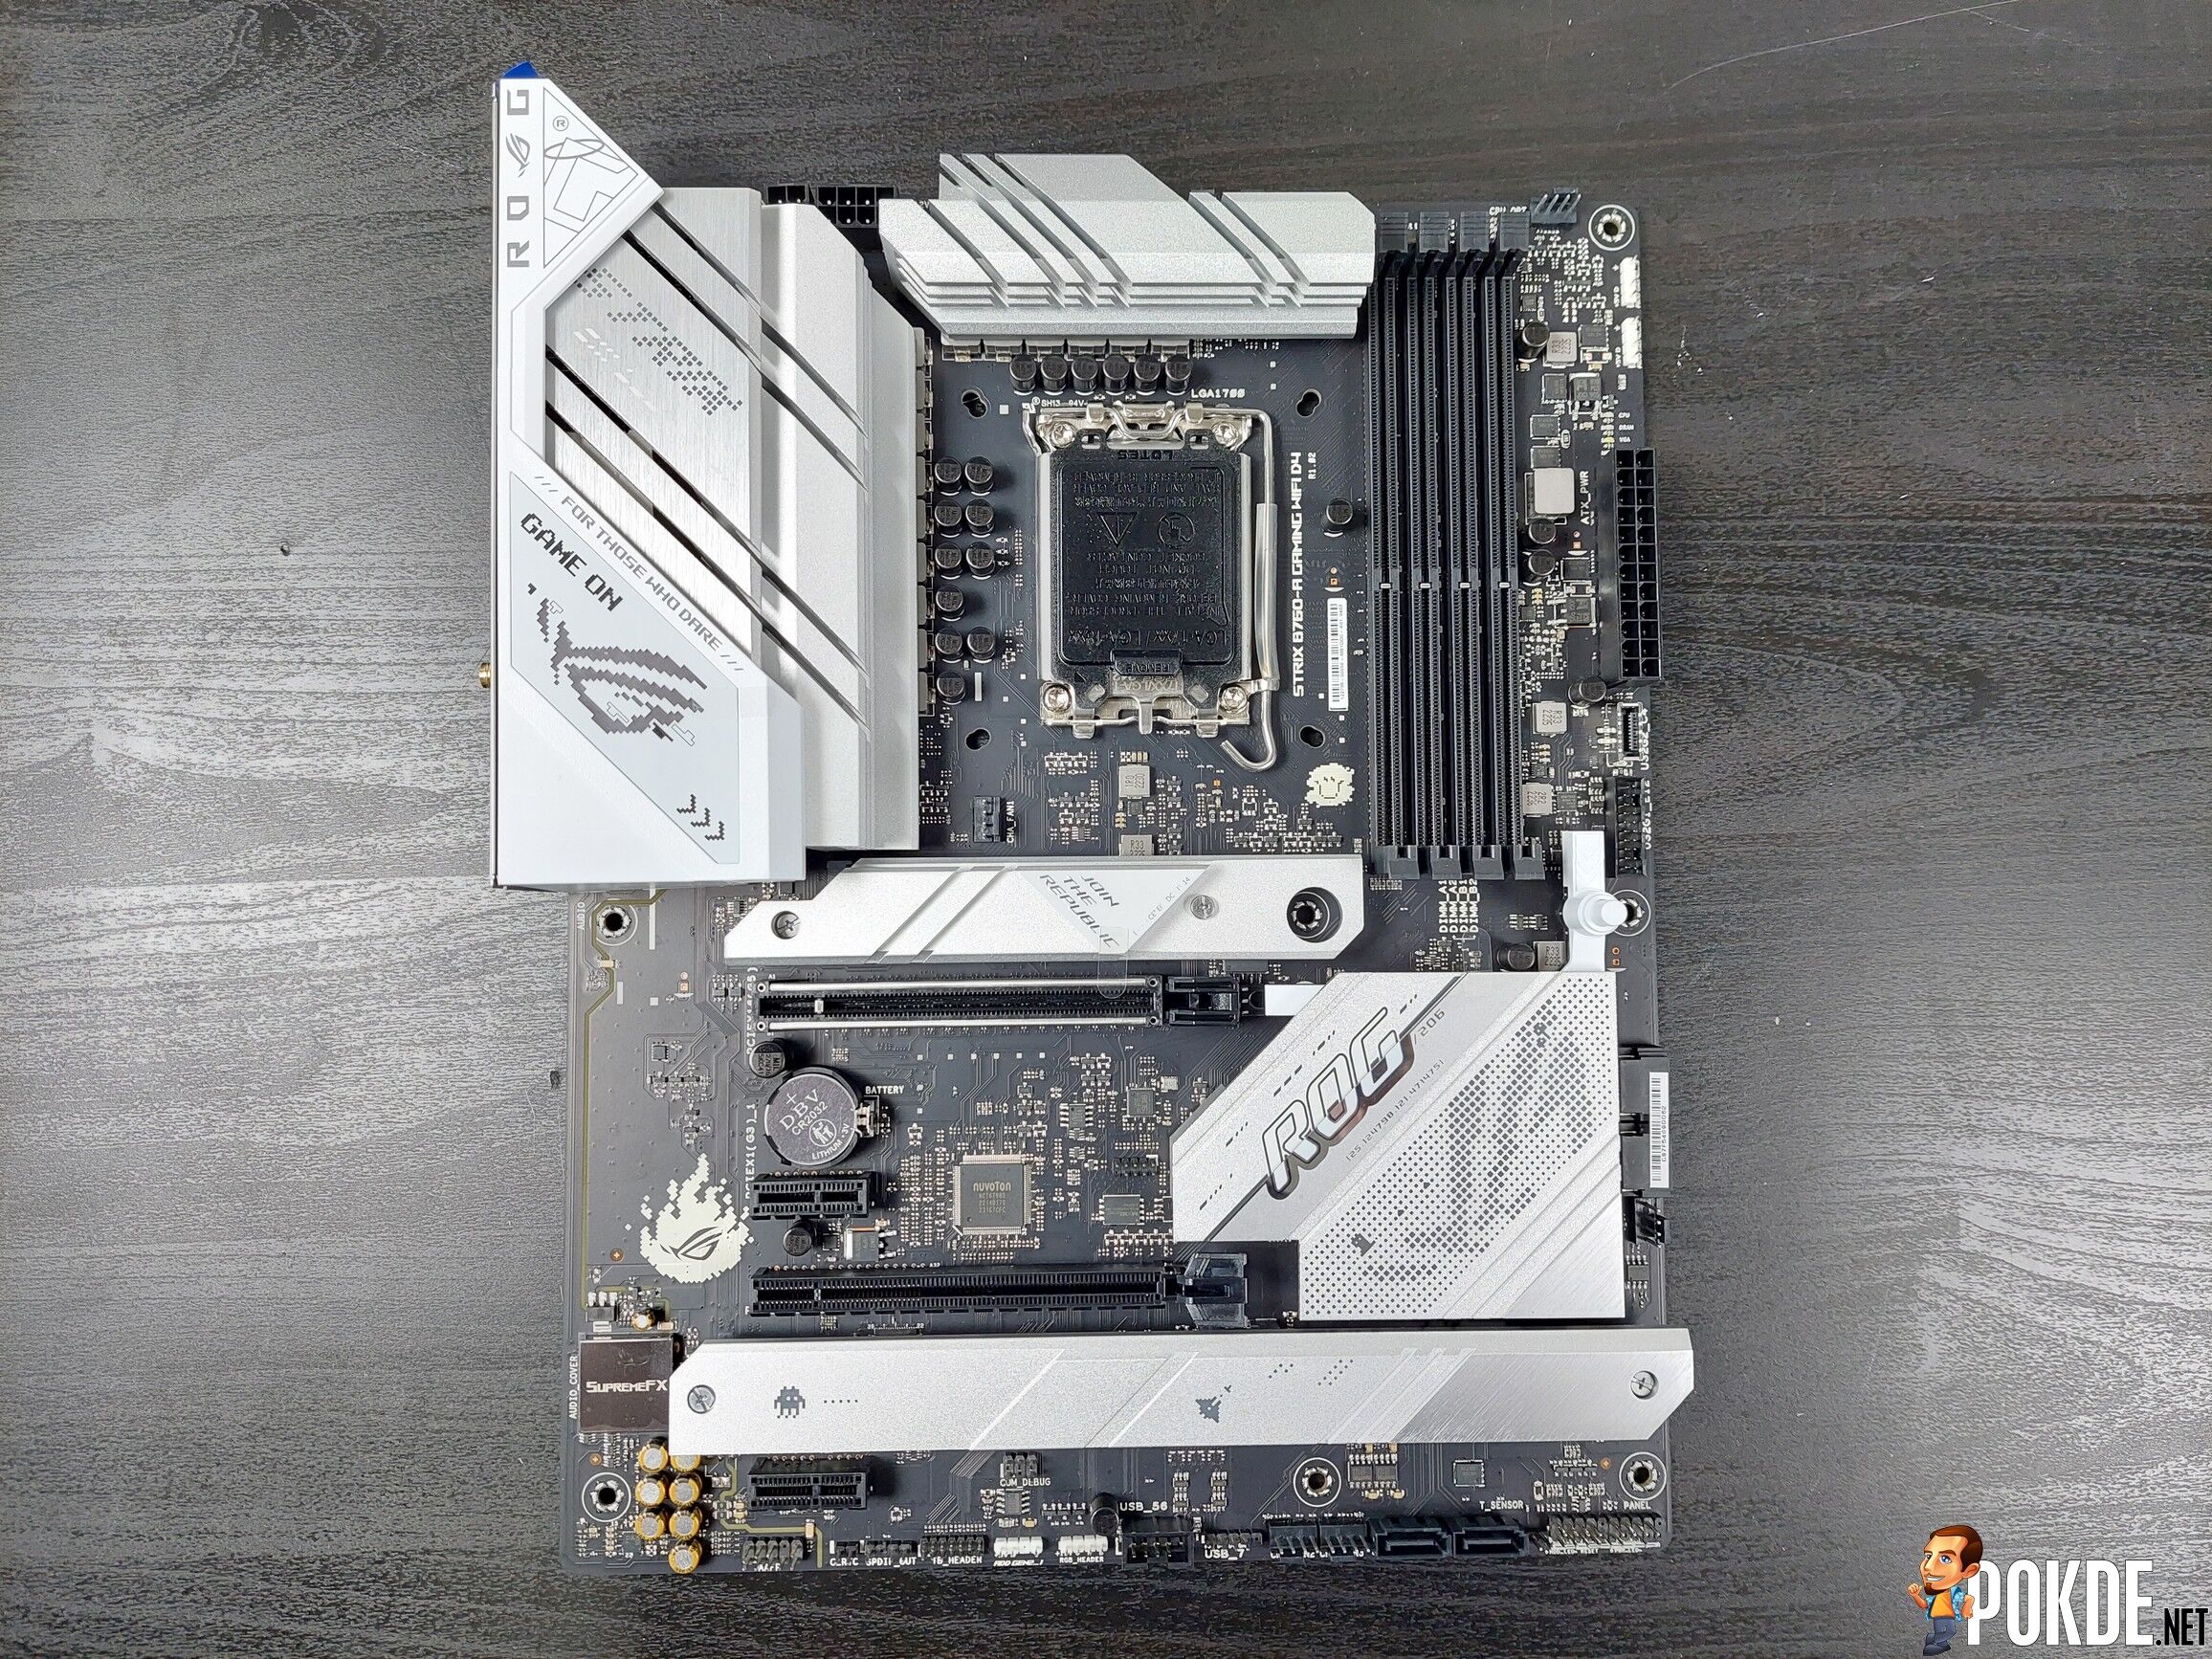 ASUS ROG STRIX B760-A GAMING WIFI D4 Review - Close To The Sun 30